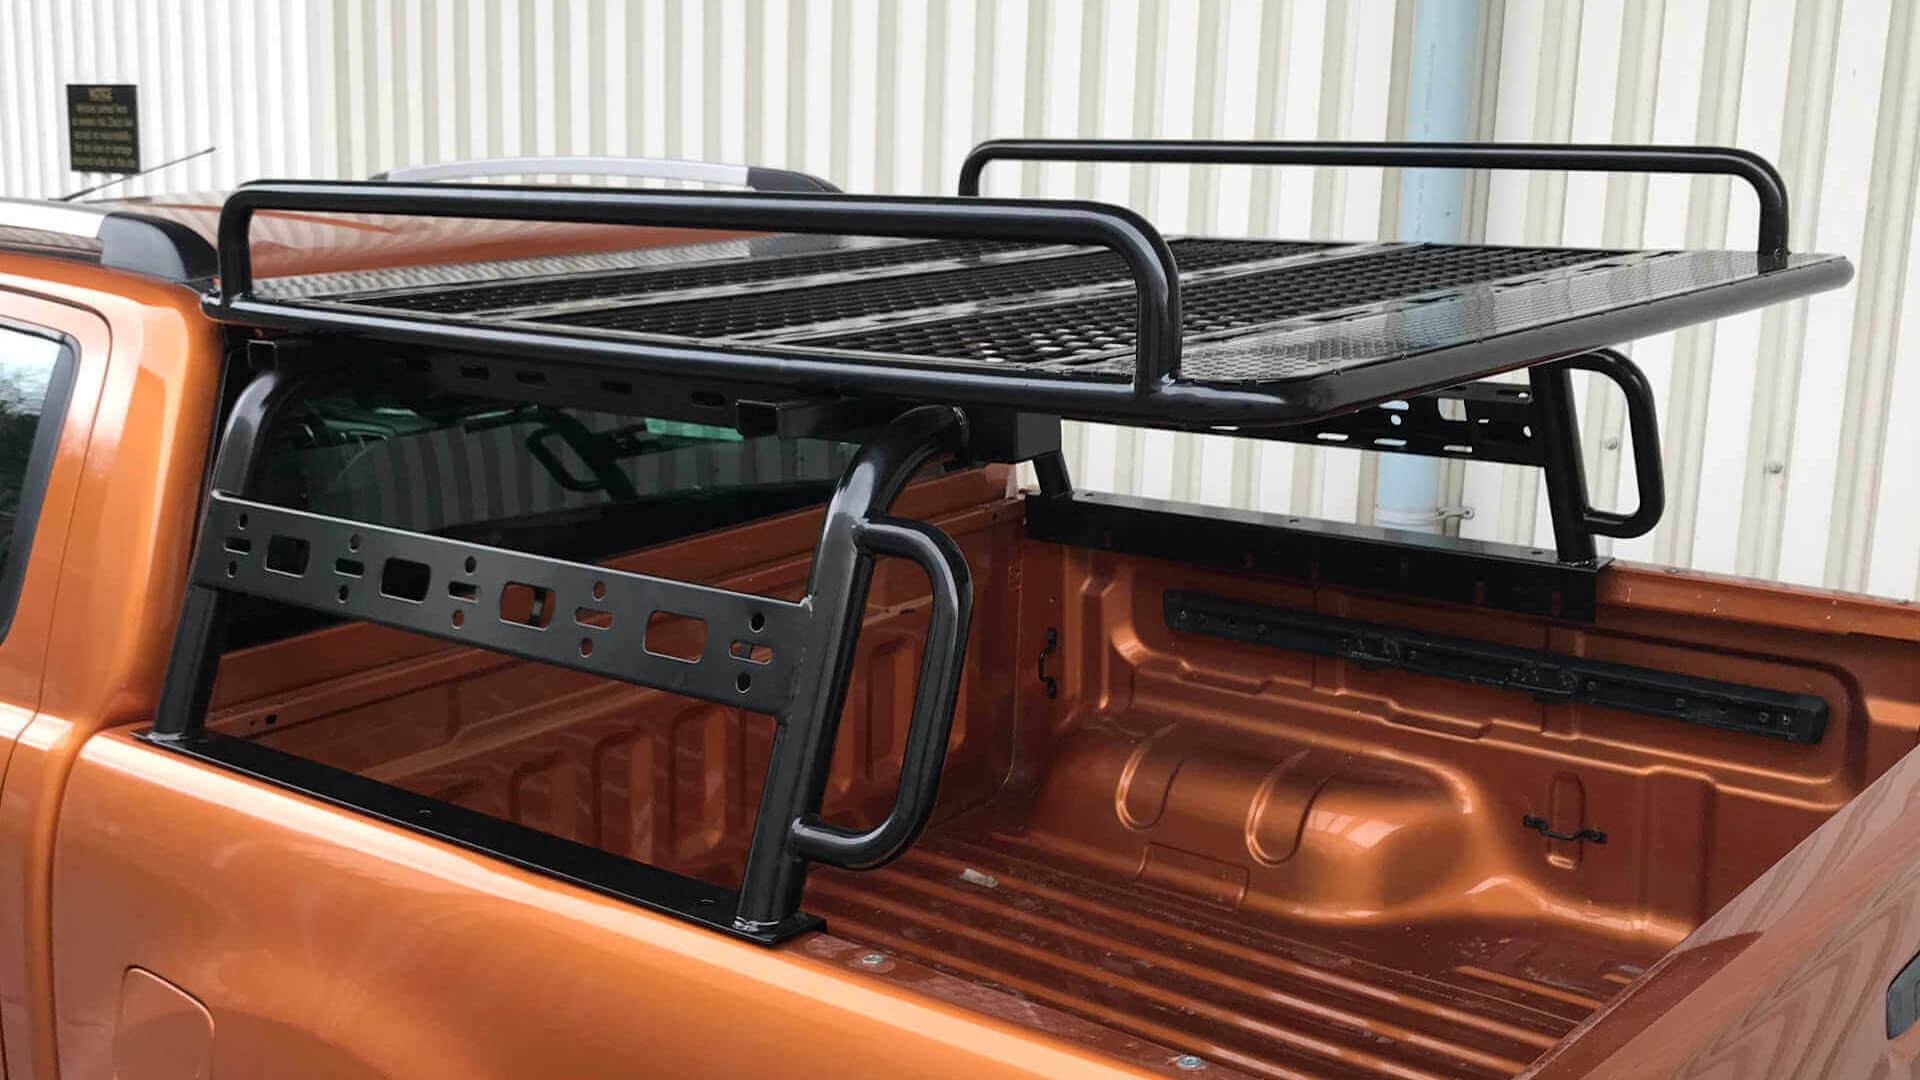 Direct4x4 expedition load bed cargo racks for pickup trucks.